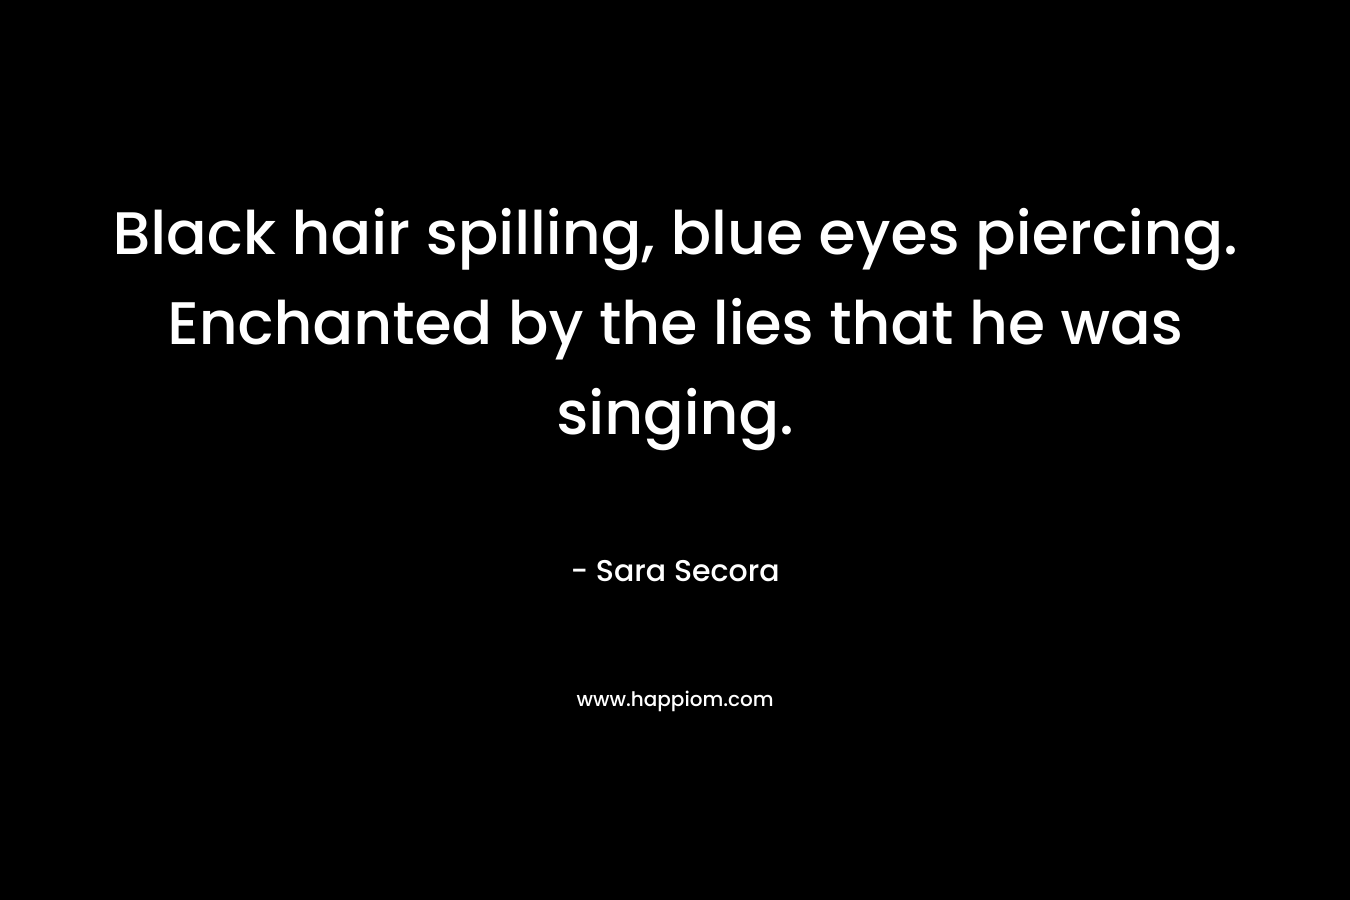 Black hair spilling, blue eyes piercing. Enchanted by the lies that he was singing.